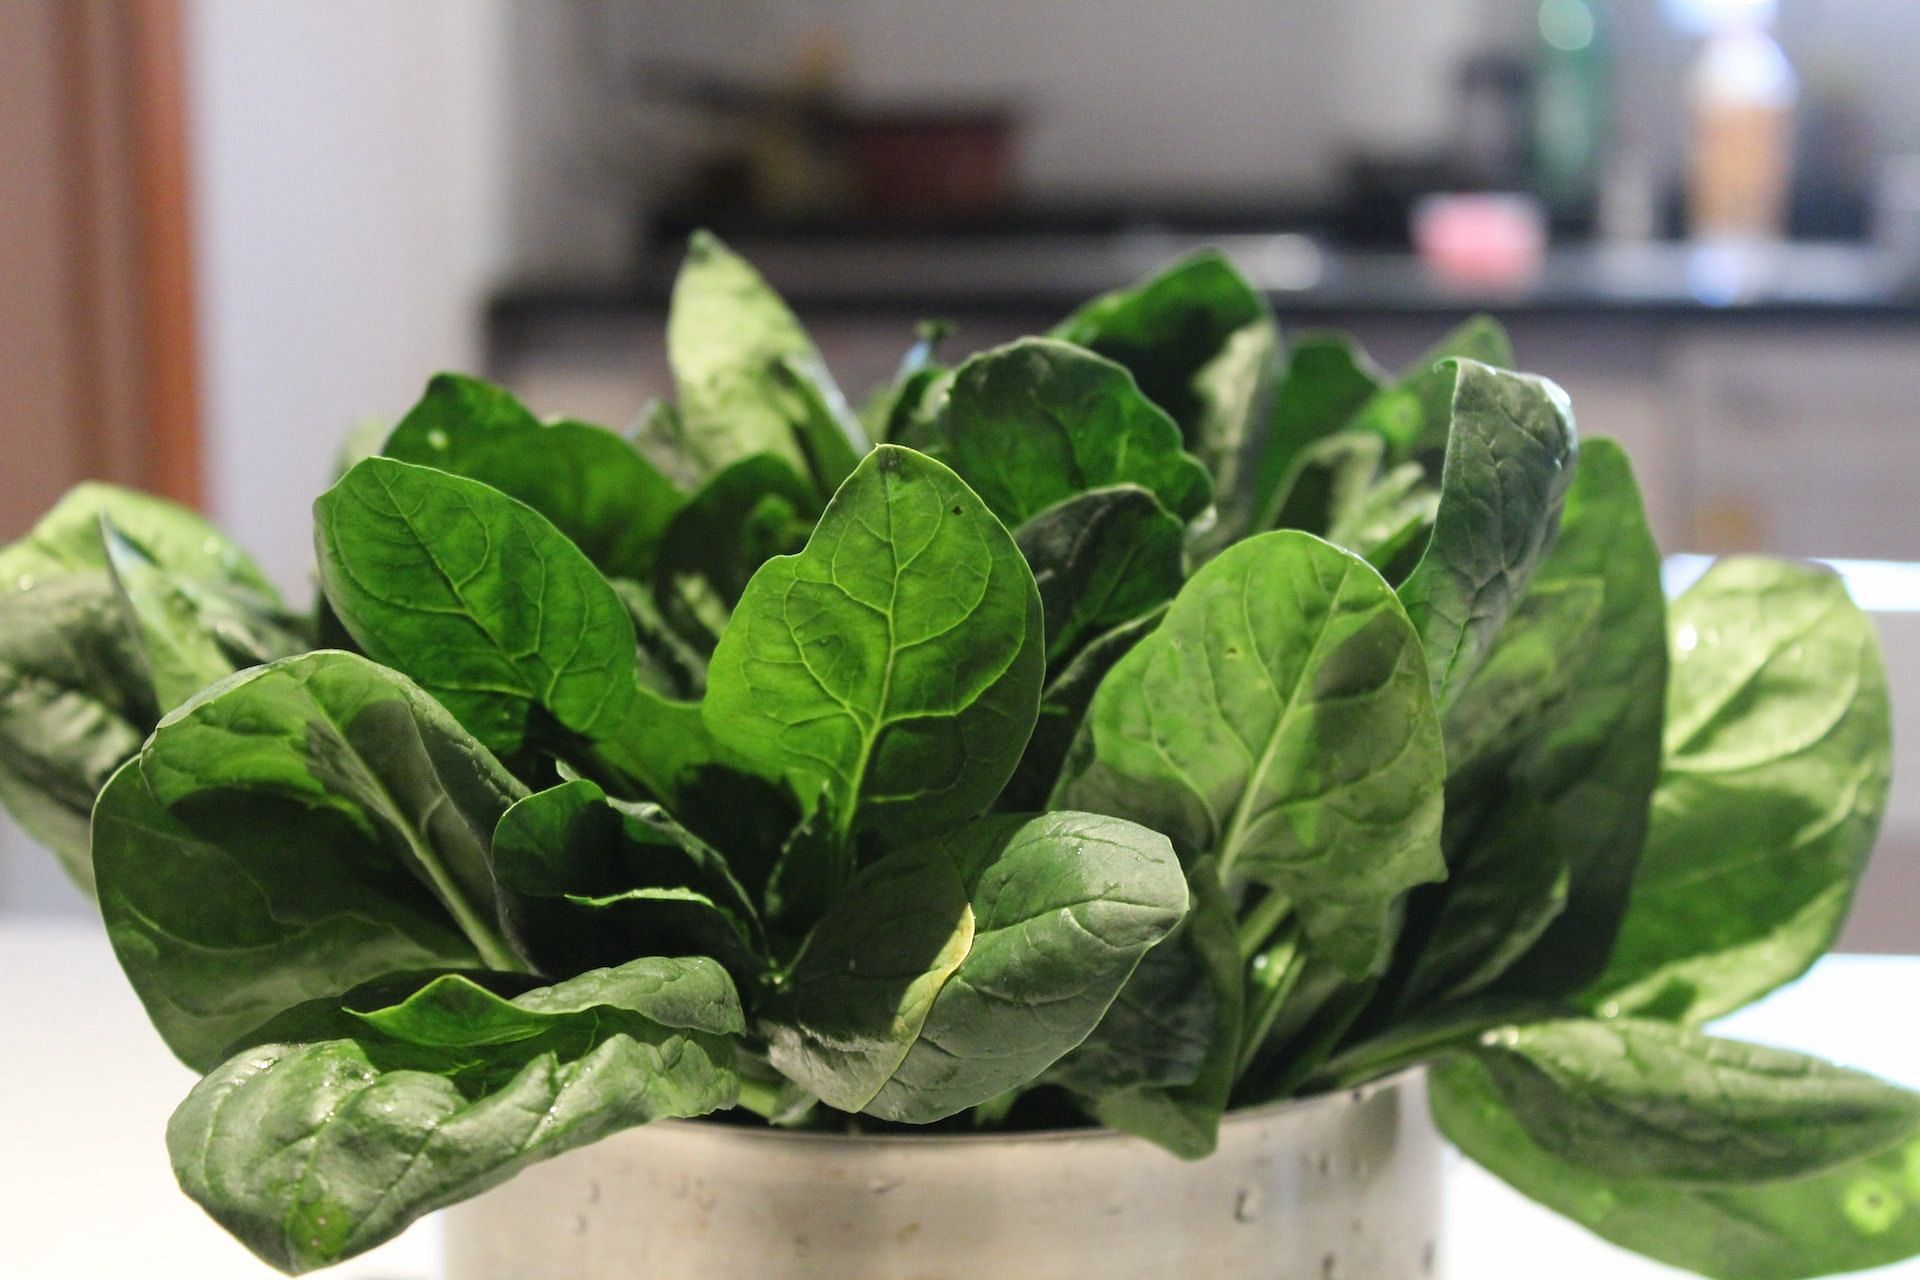 Mustard greens can cause adverse reactions. (Photo via Unsplash/Rens D)